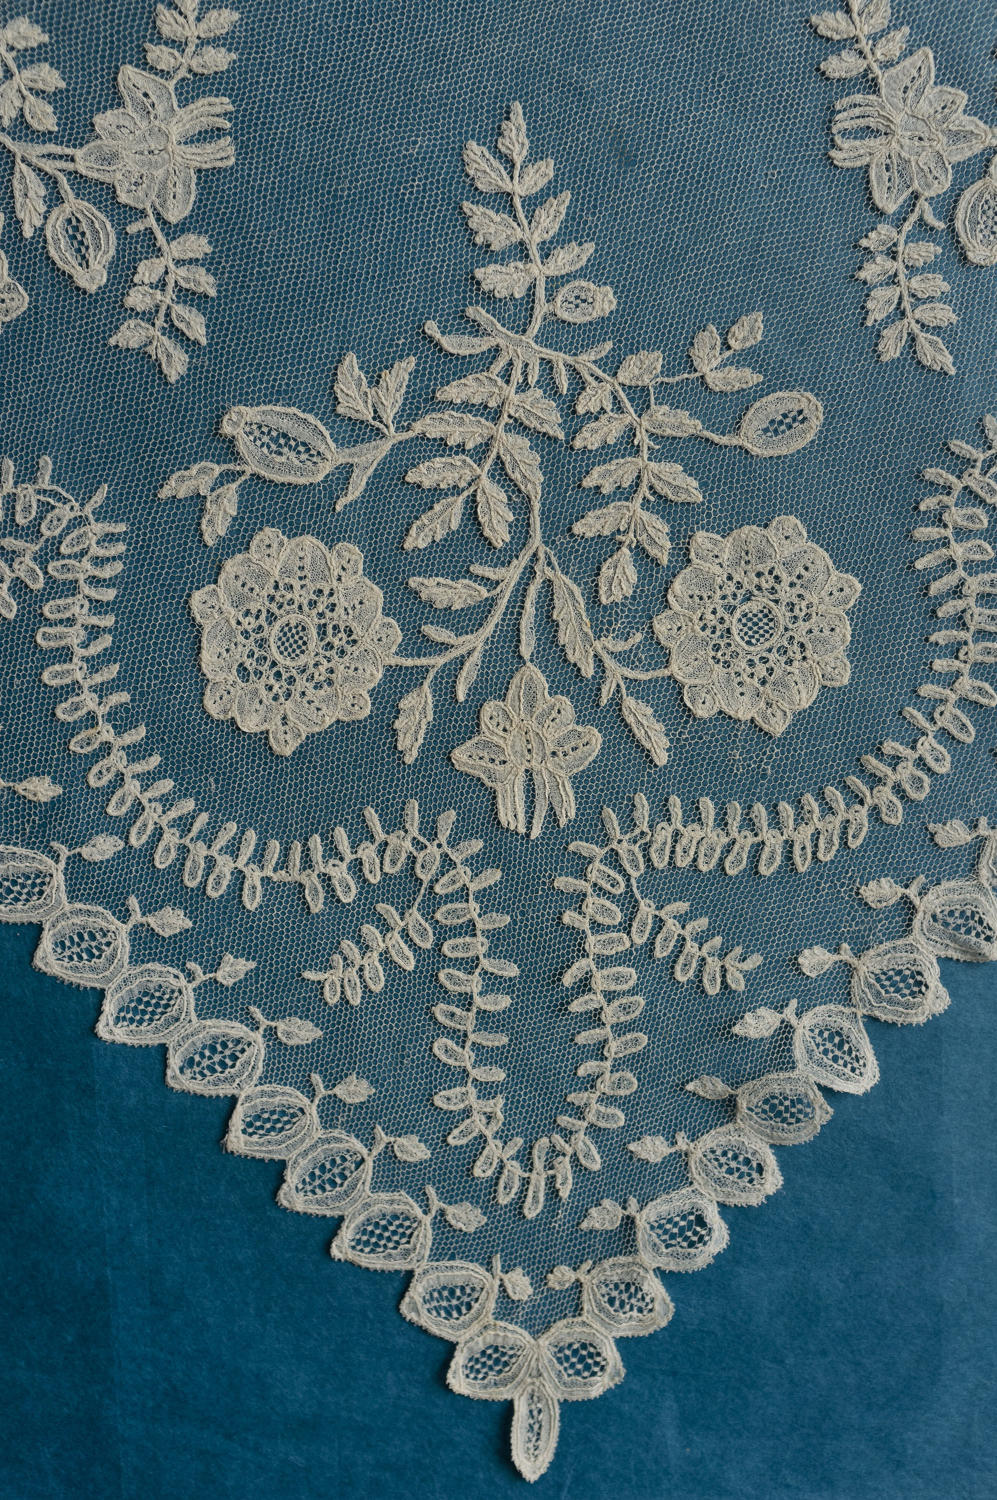 Georgian Brussels Applique Lace Veil with Droschel ground